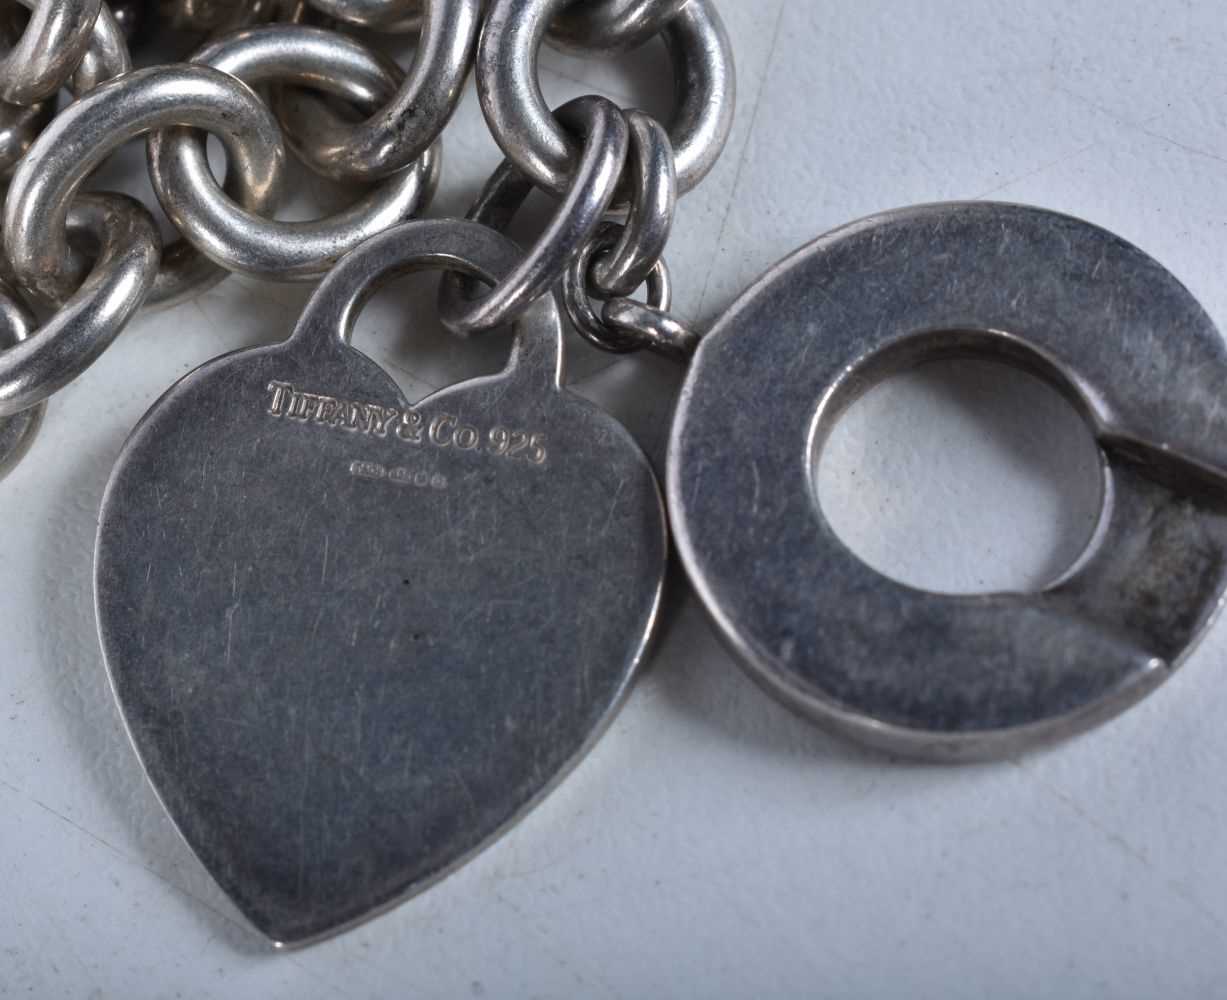 Silver necklace with heart tag by designer Tiffany & Co. Stamped Tiffany 925, Length 41cm, weight - Image 2 of 3